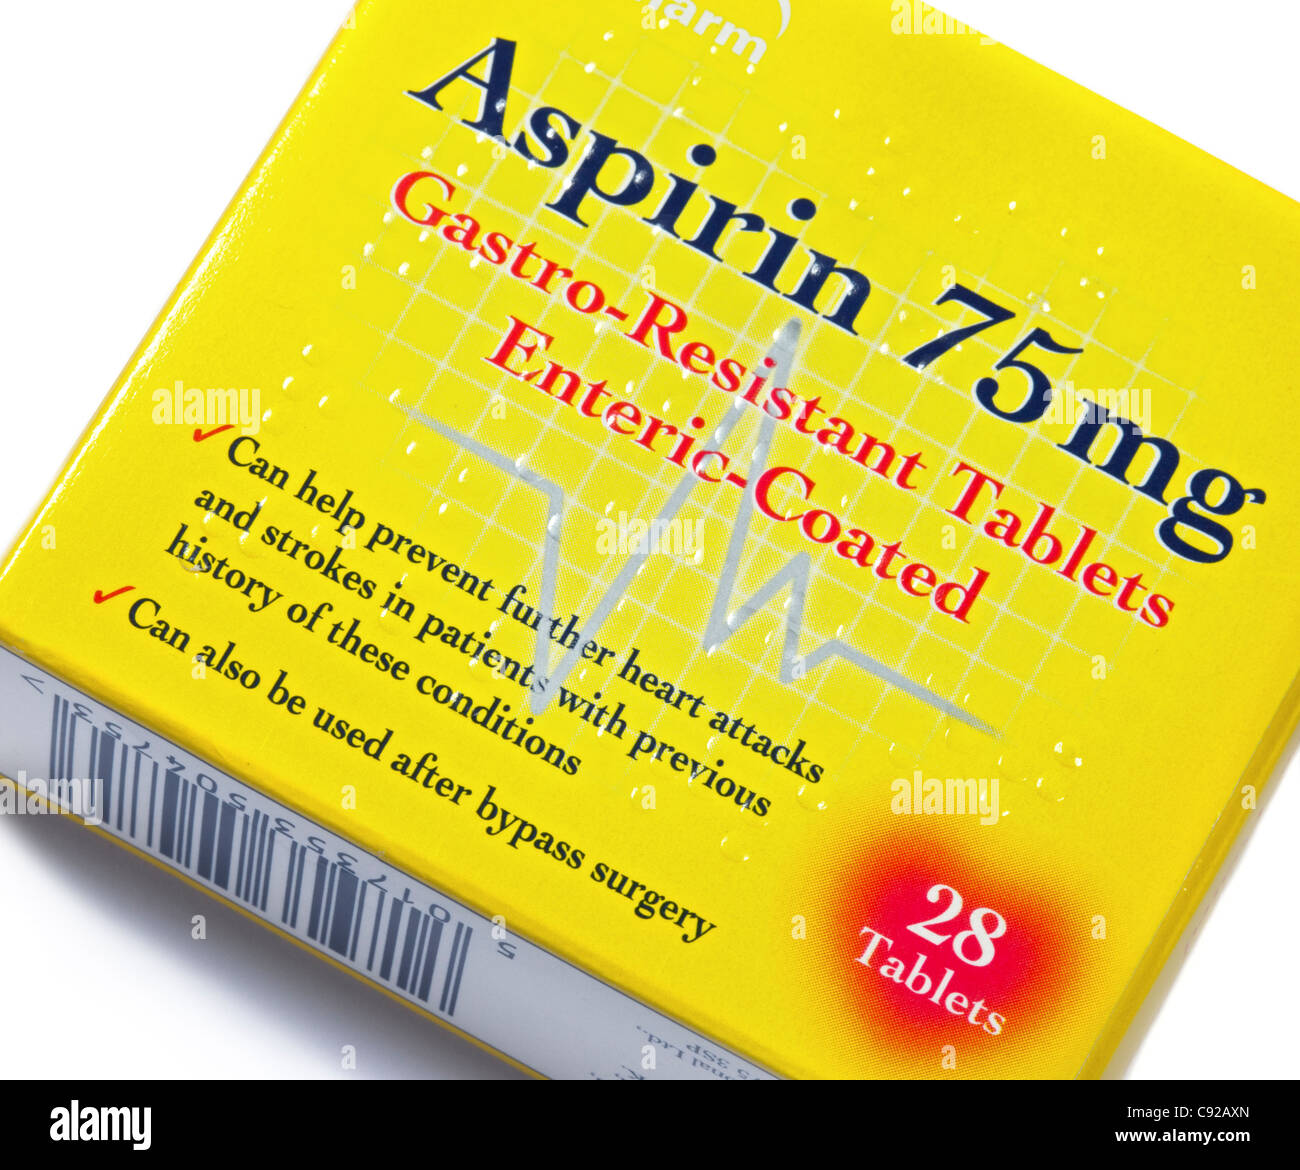 75 mg Aspirin Tablets used to control Heart Problems Stock Photo